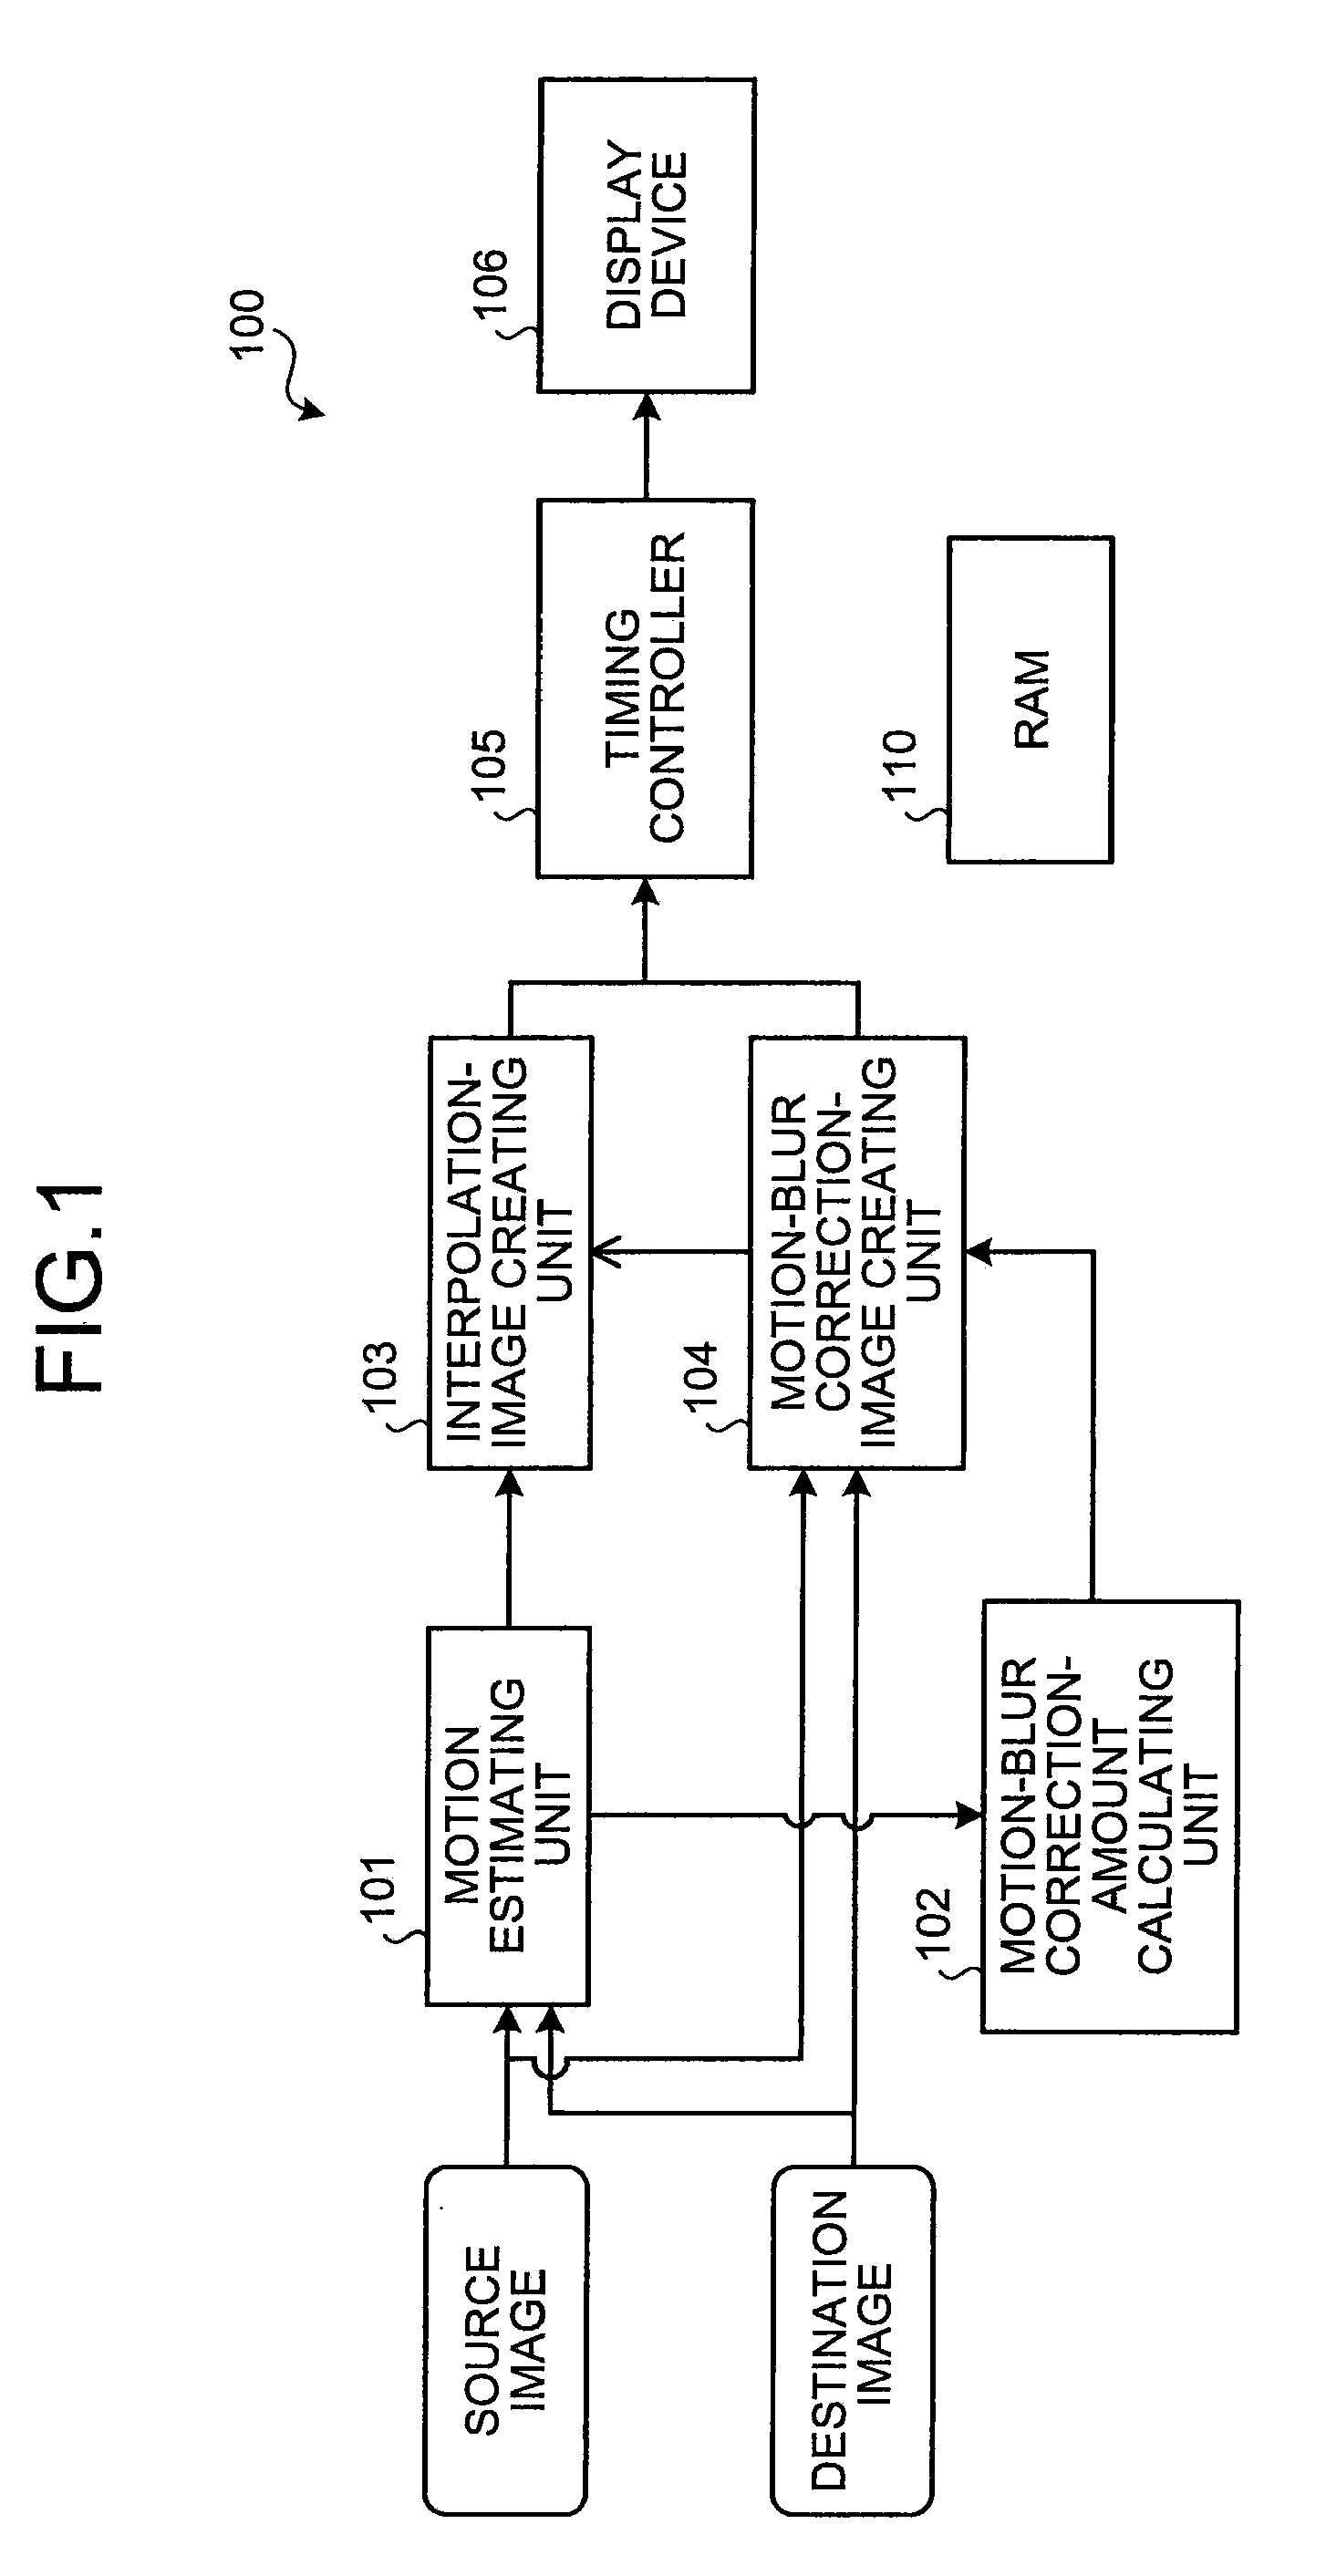 Image processing apparatus, method, and computer program product